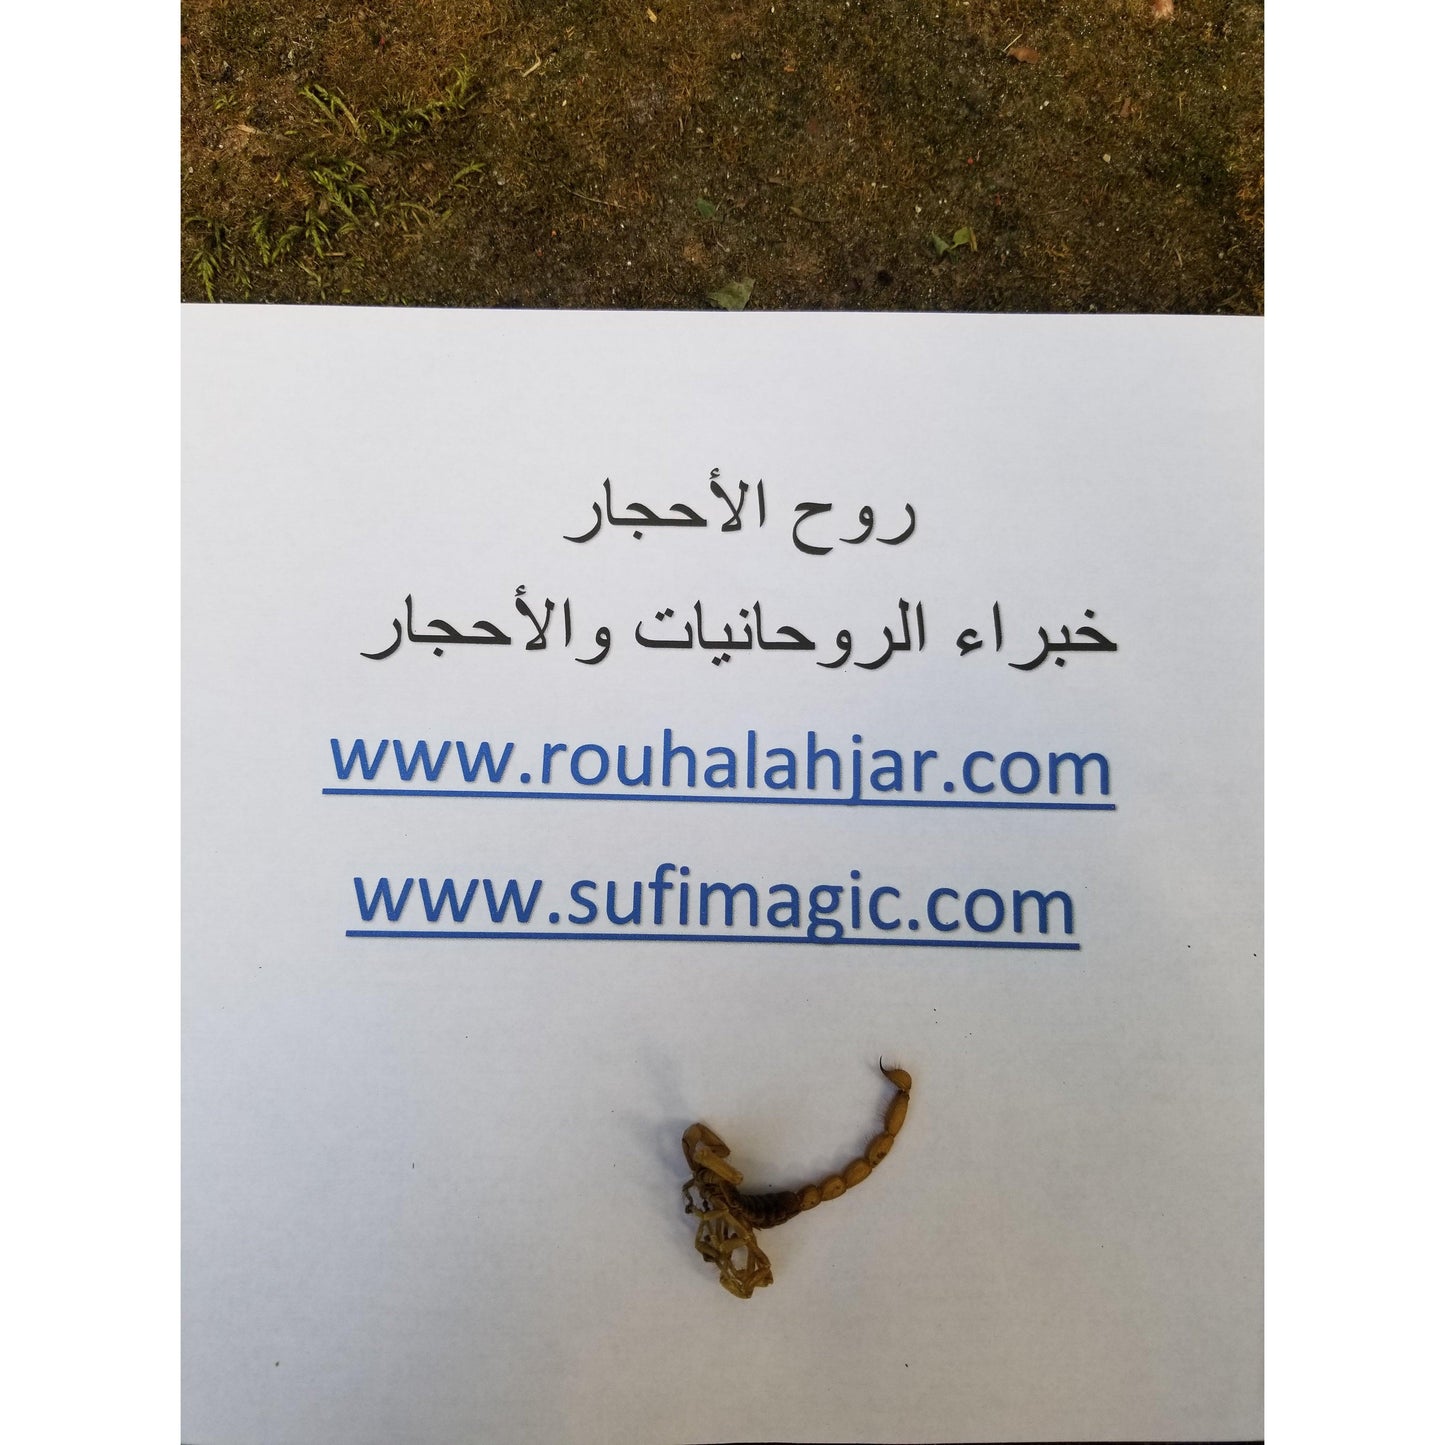 Arabic text written on paper with Scorpion  